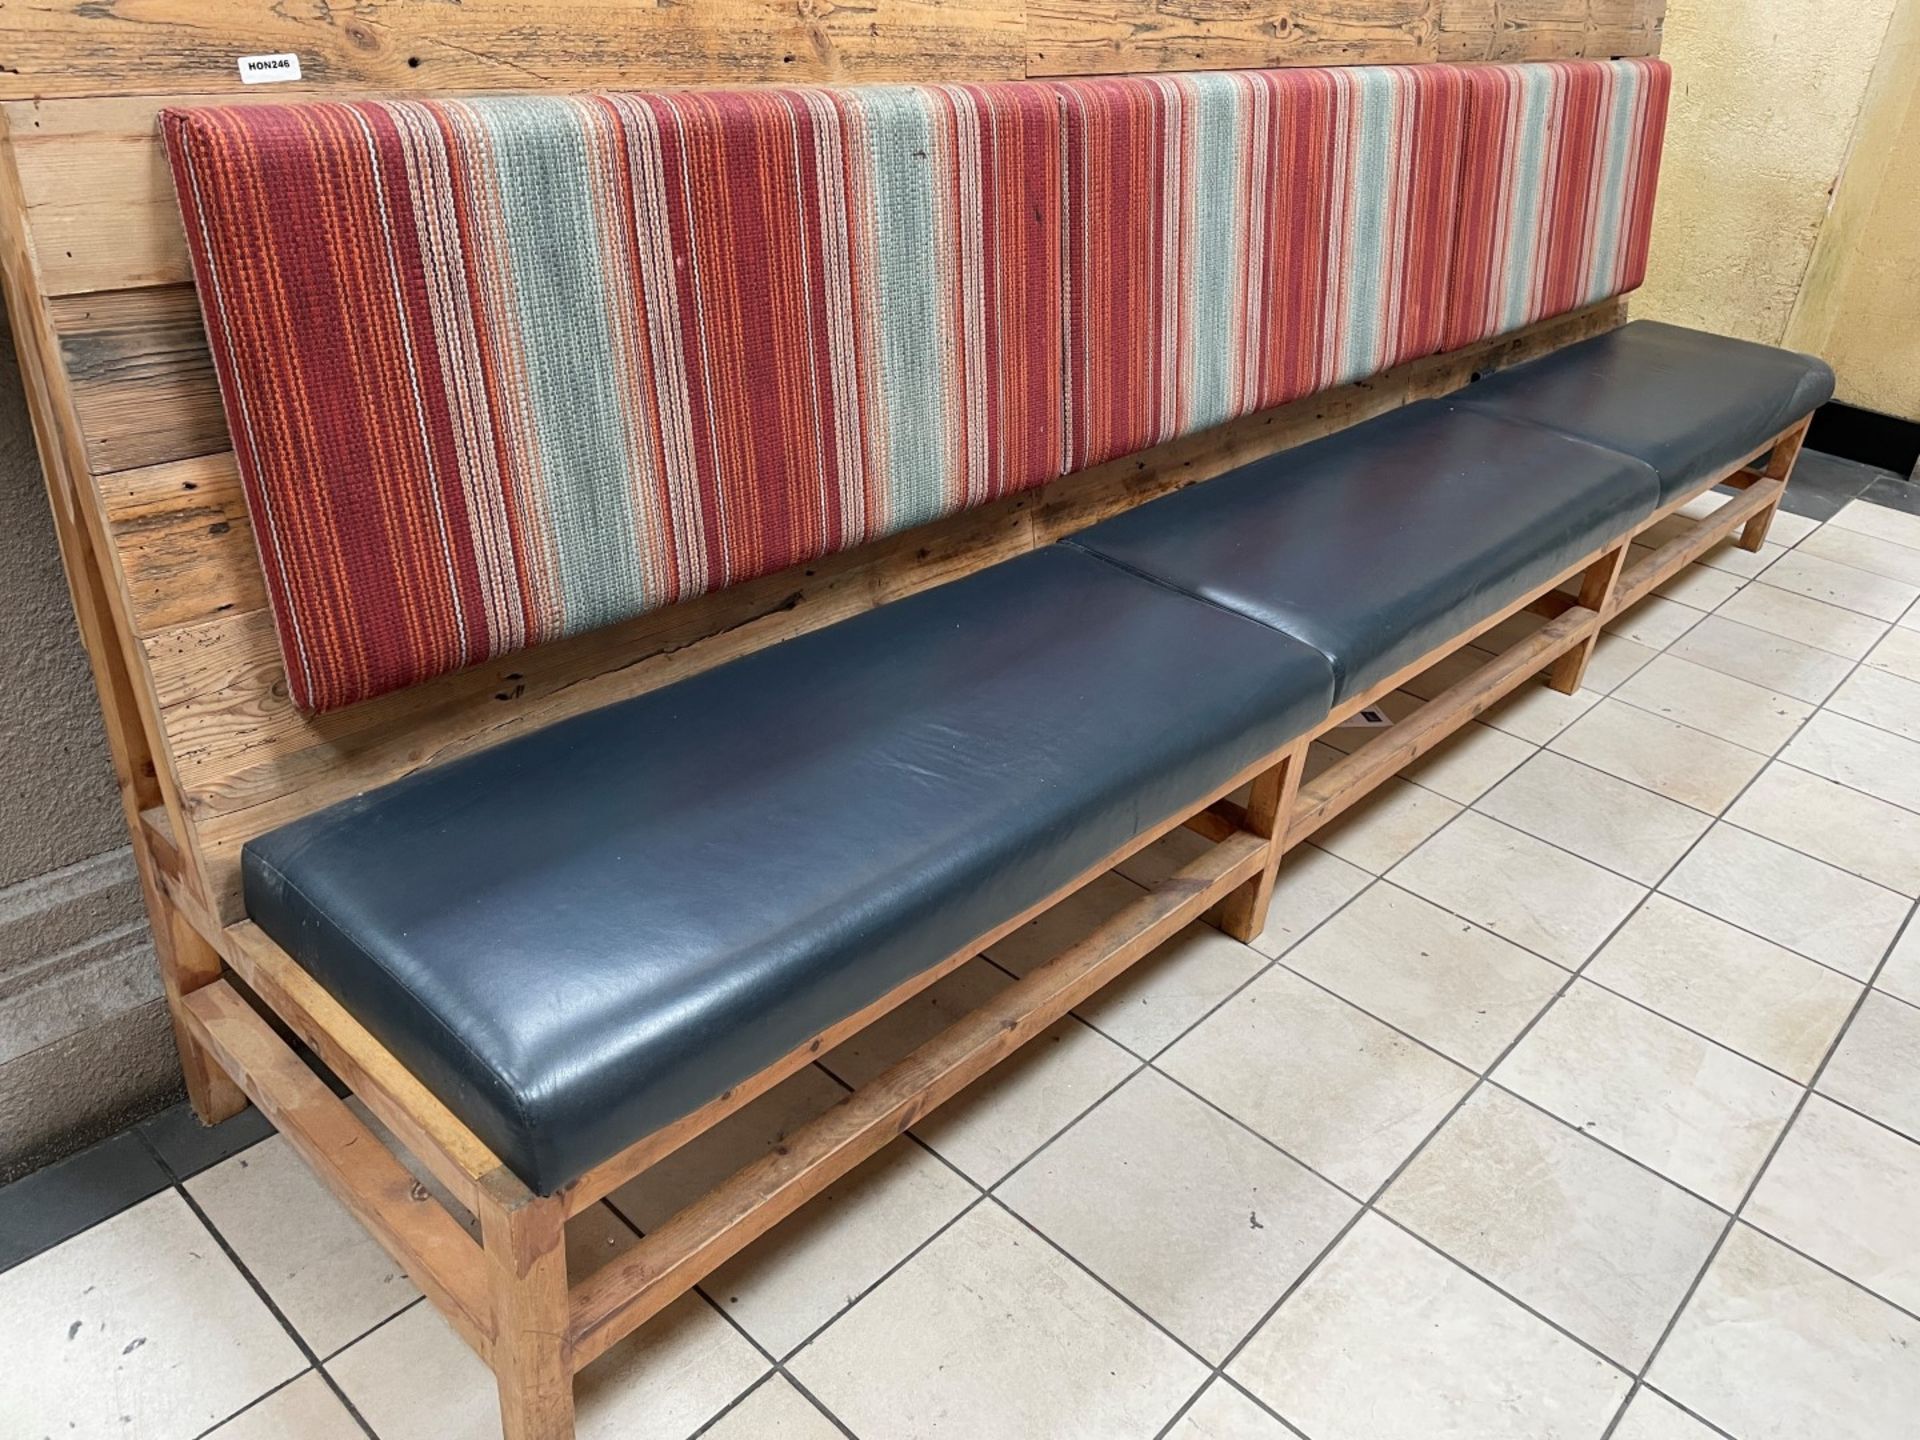 1 x Wooden Seating Bench Featuring Genuine Leather Seat Pads and Striped Fabric Back Rests -